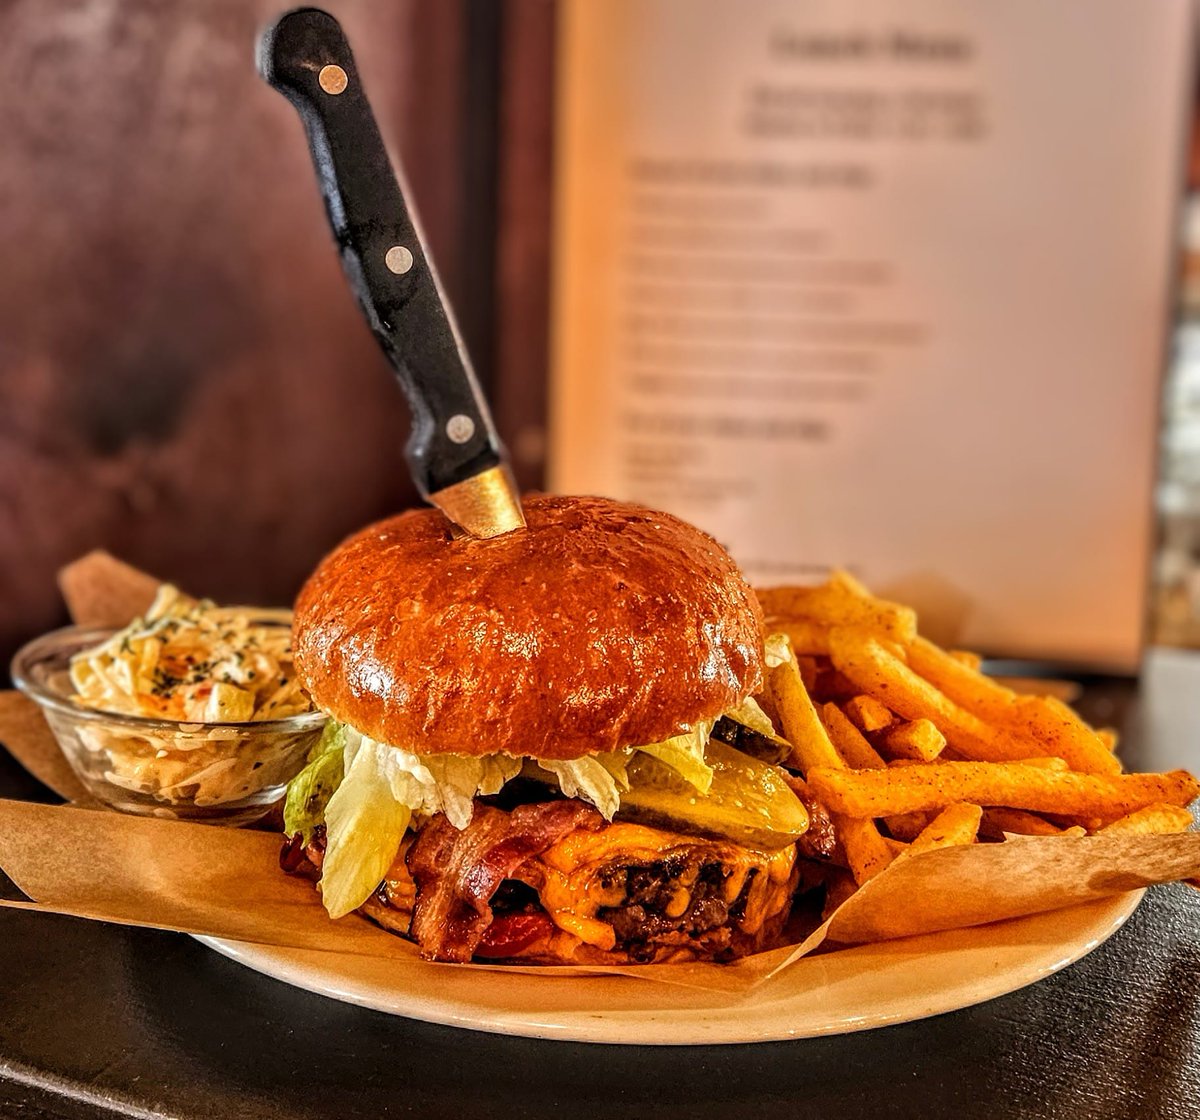 Come and try our delicious homemade burgers. Available from our menu, or 

Lunchtime special Fr. 24 with a 3dl drink. 

Every Thursday evening Fr. 27 with a pint of your choice. 

#thepenny #bestburgerintown #intheheartofaarau #yourbritishpub